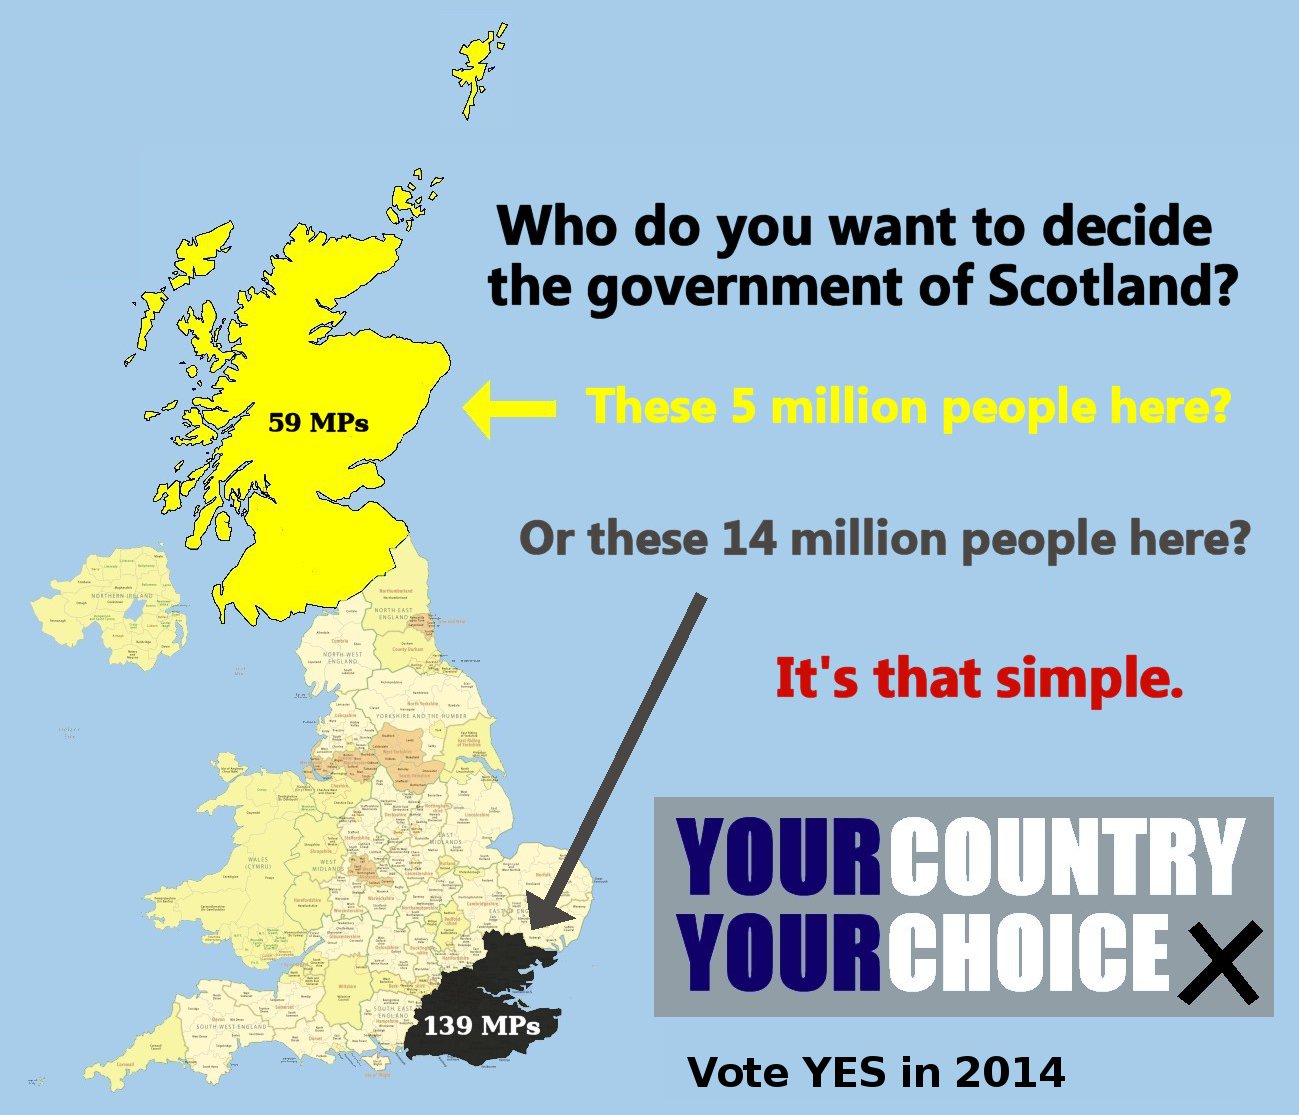 Who should Decide the Government of Scotland?